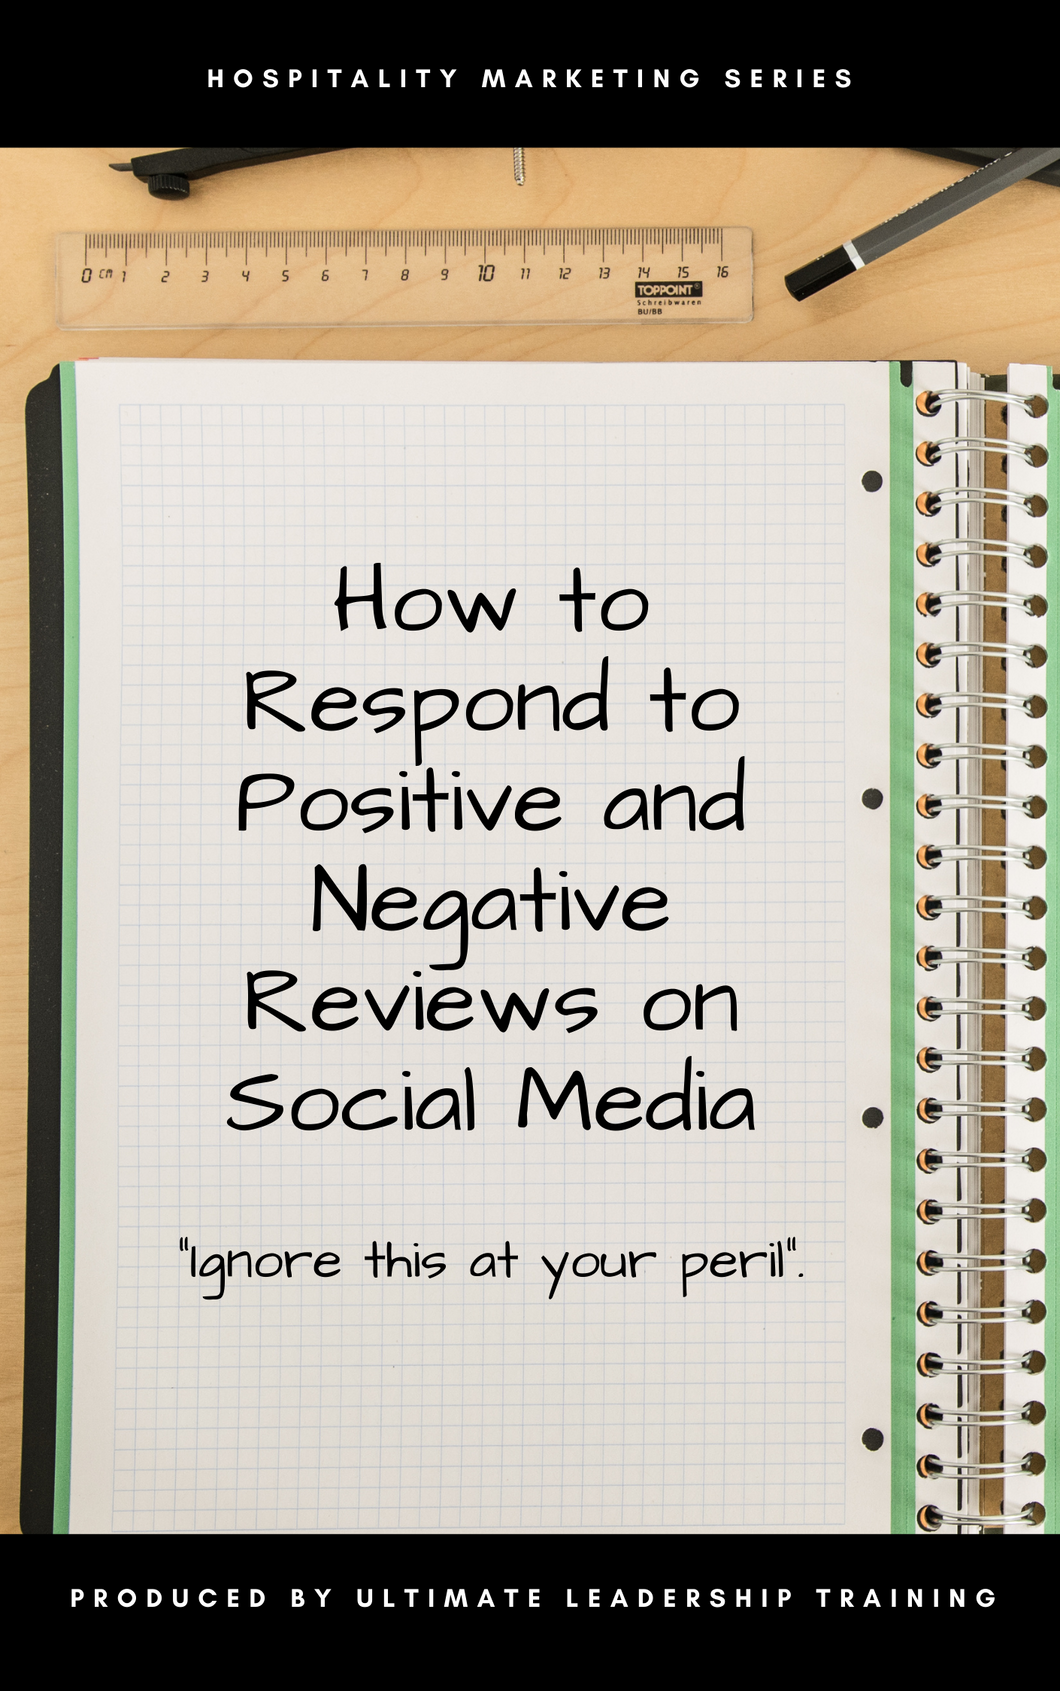 How to Respond to Positive and Negative Reviews on Social Media